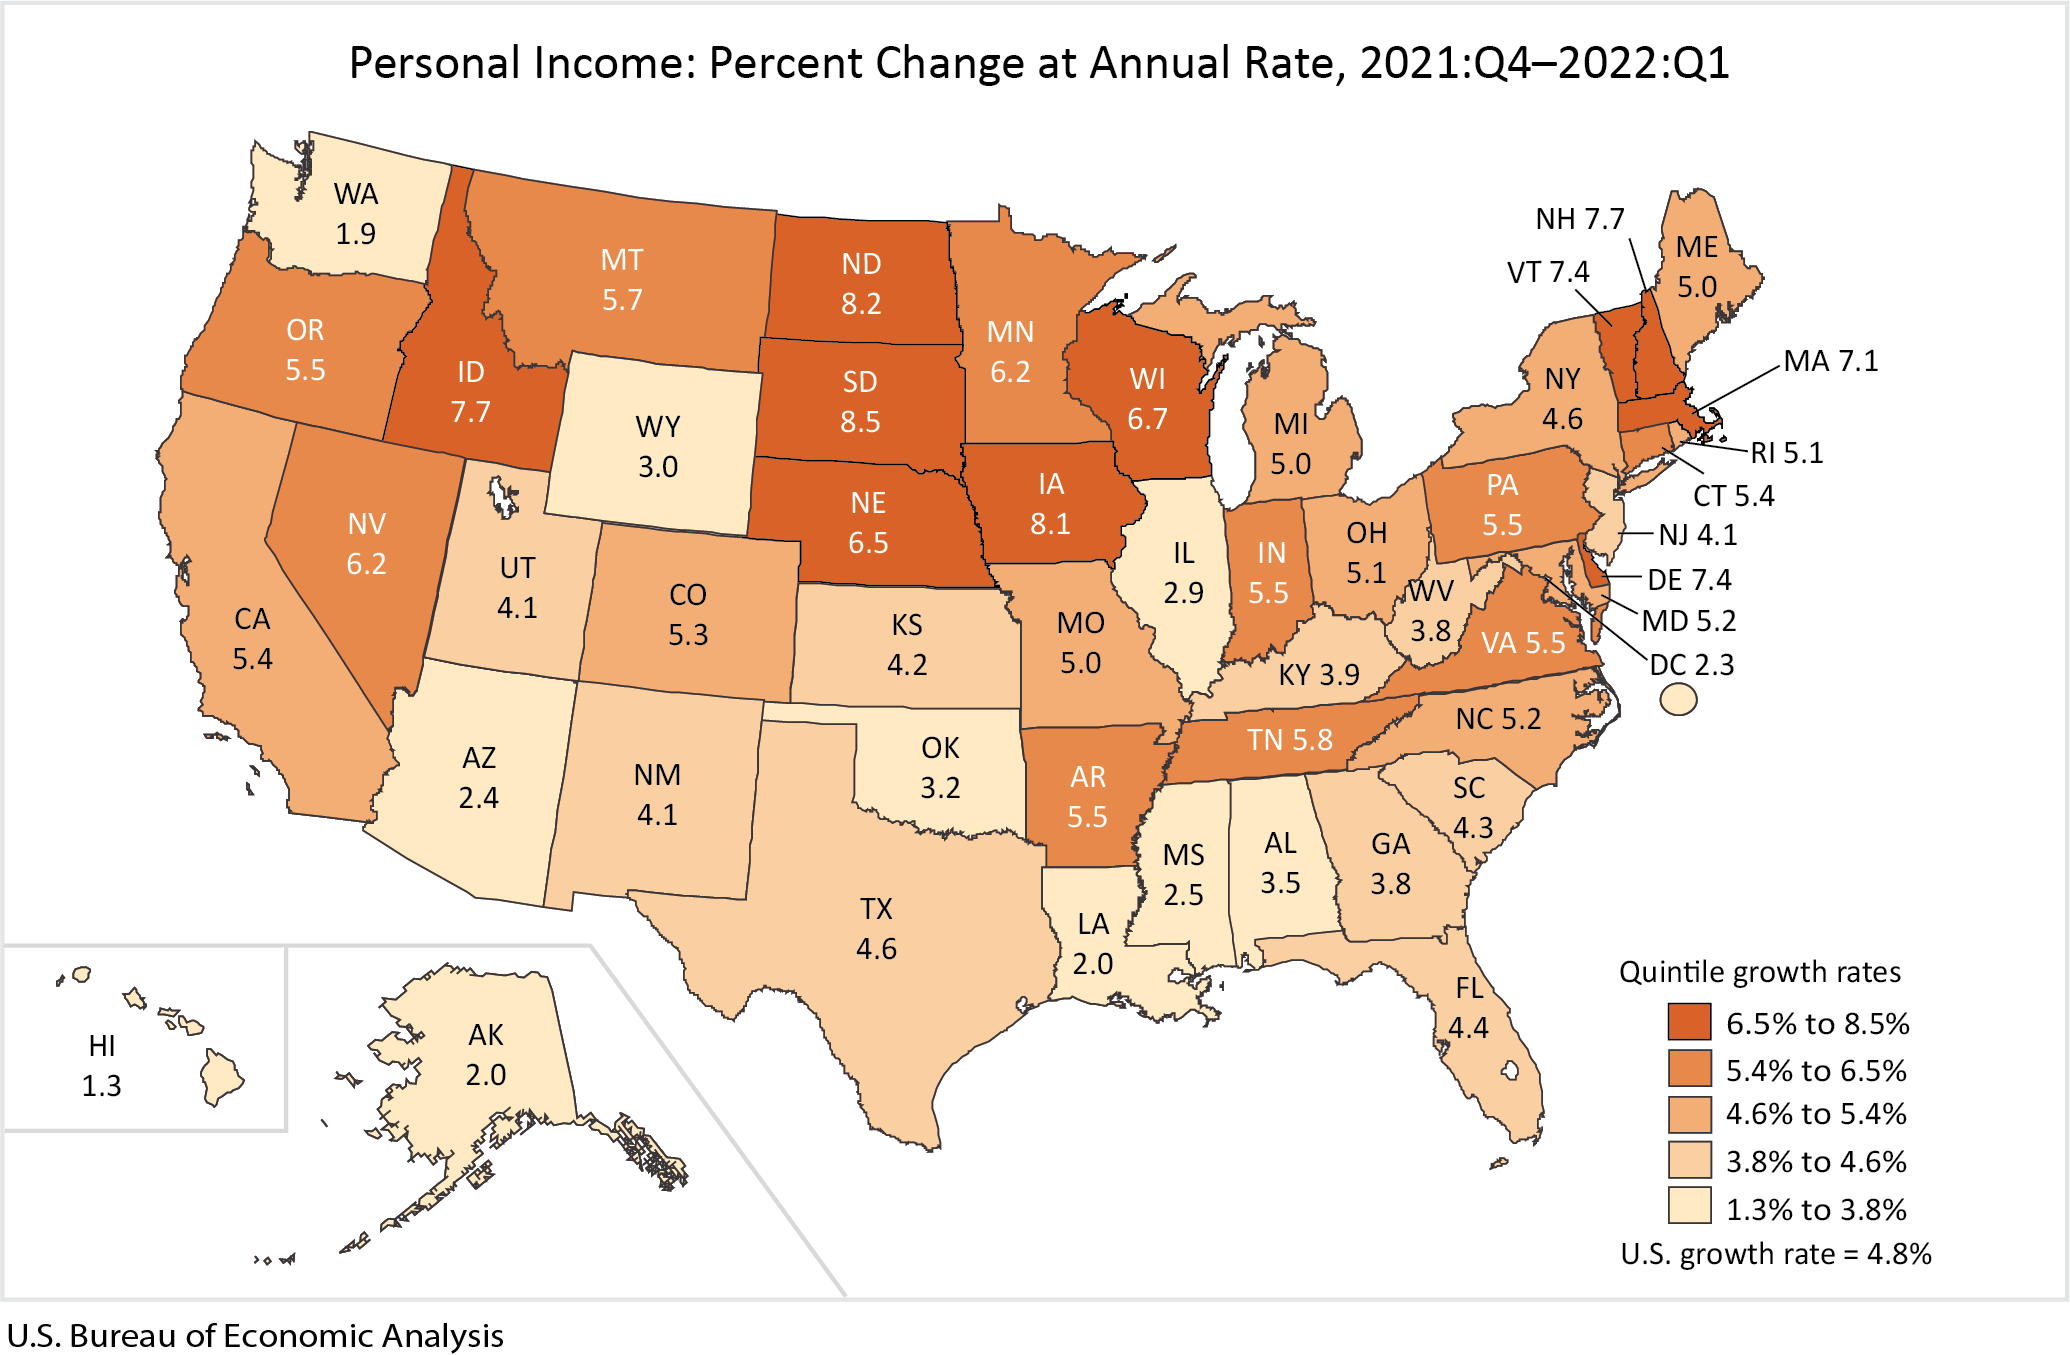 Map: Personal Income: Percent Change at Annual Rate, 2021Q4-2022:Q1